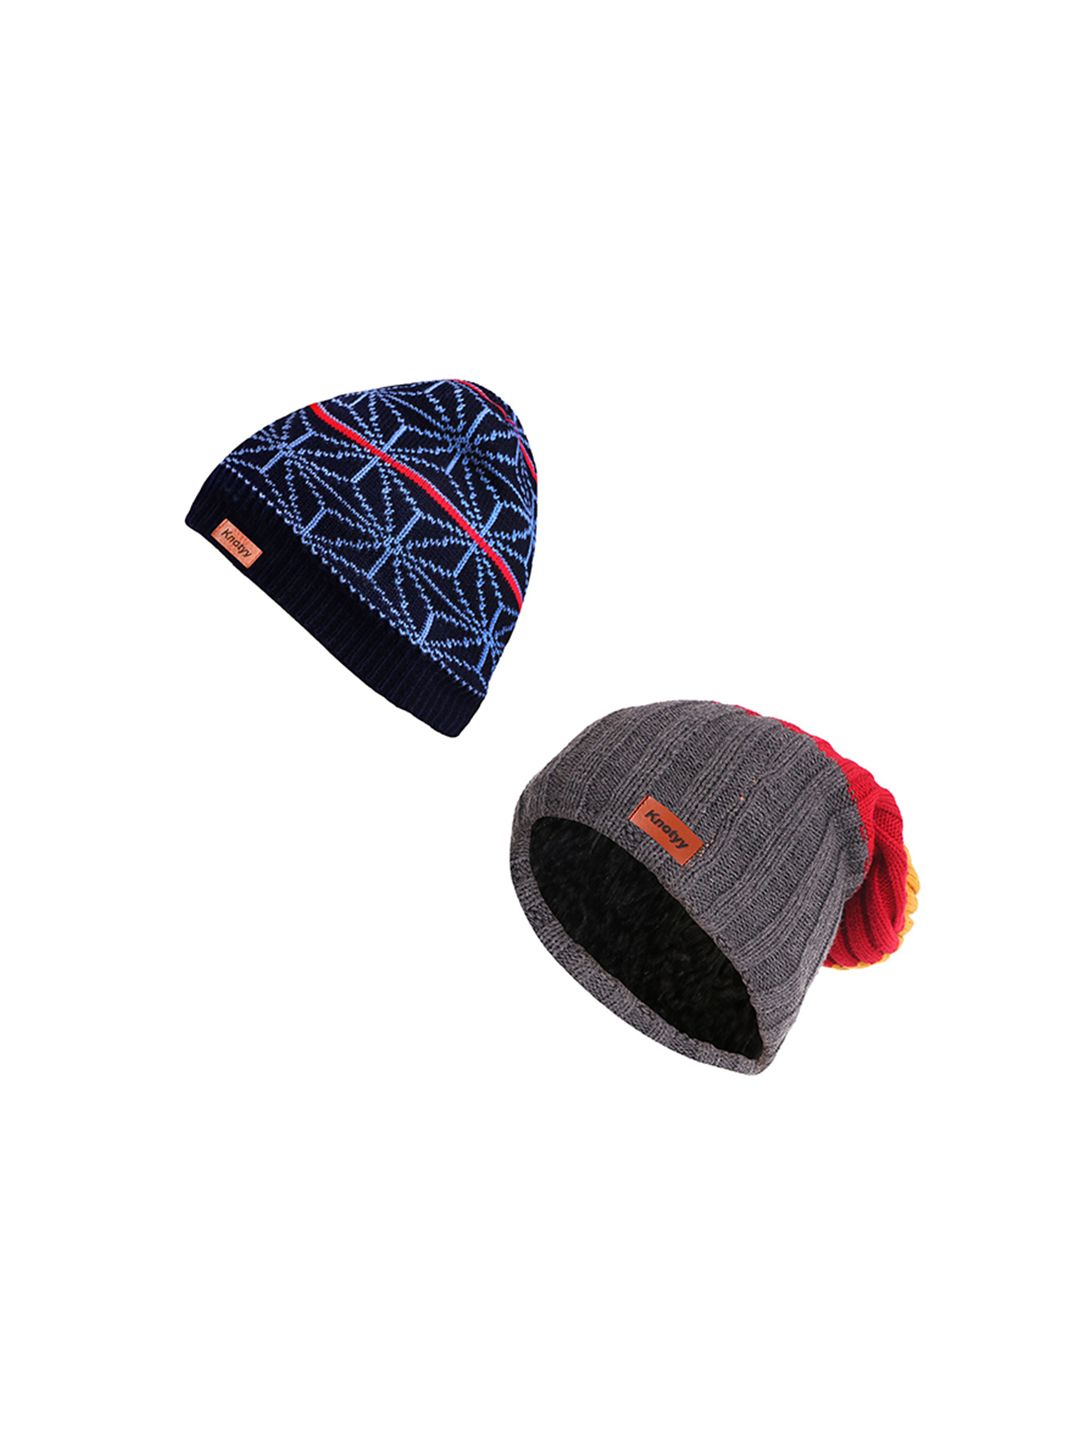 Knotyy Adult Pack of 2 Blue & Grey Beanie Price in India